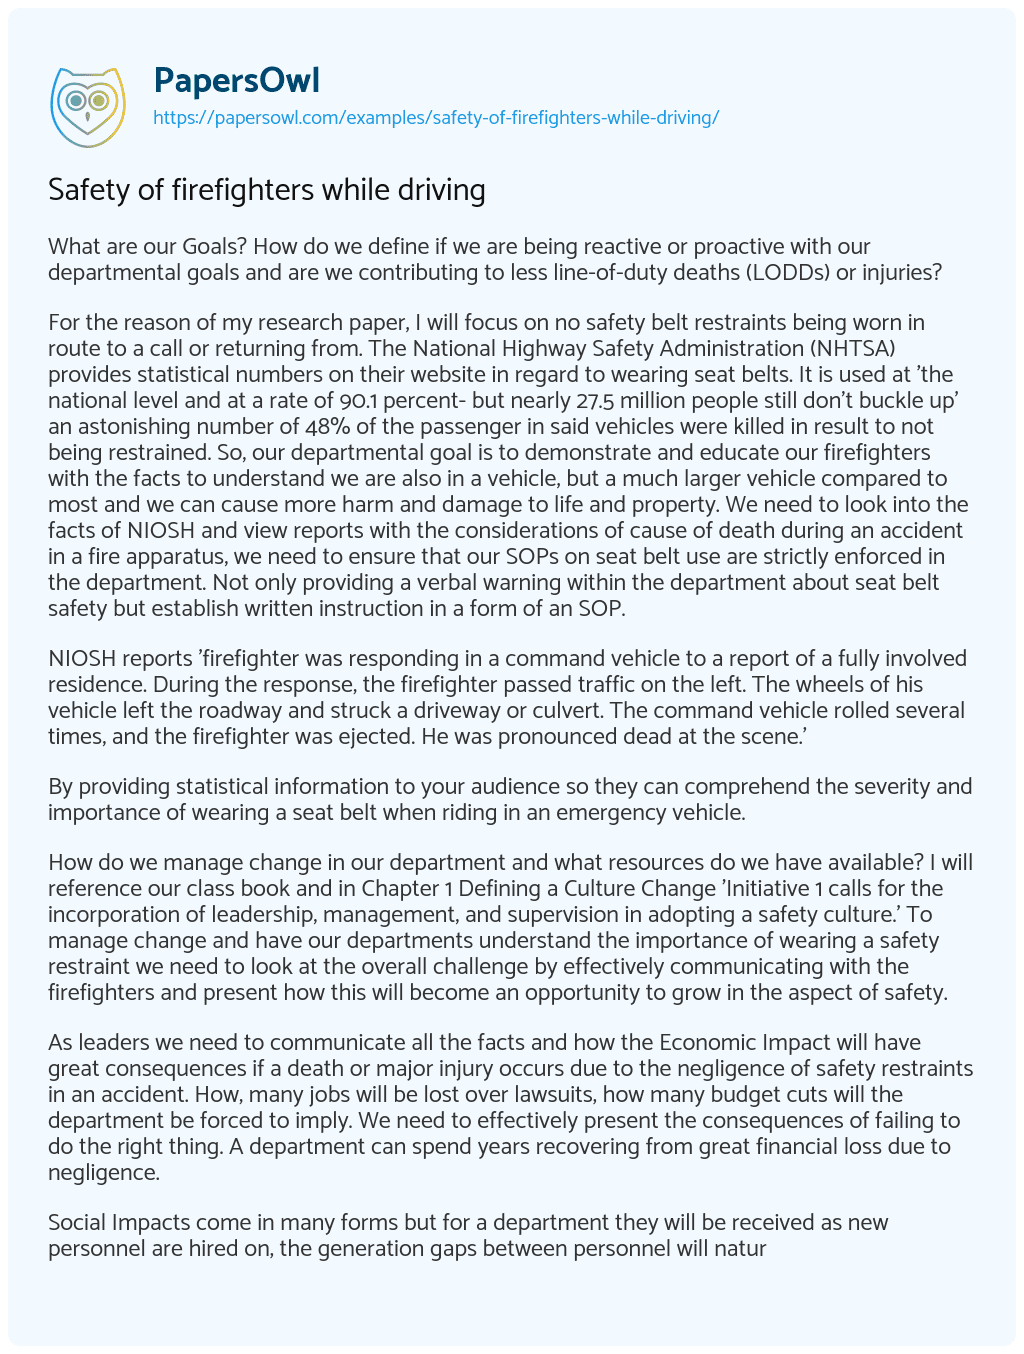 Essay on Safety of Firefighters while Driving